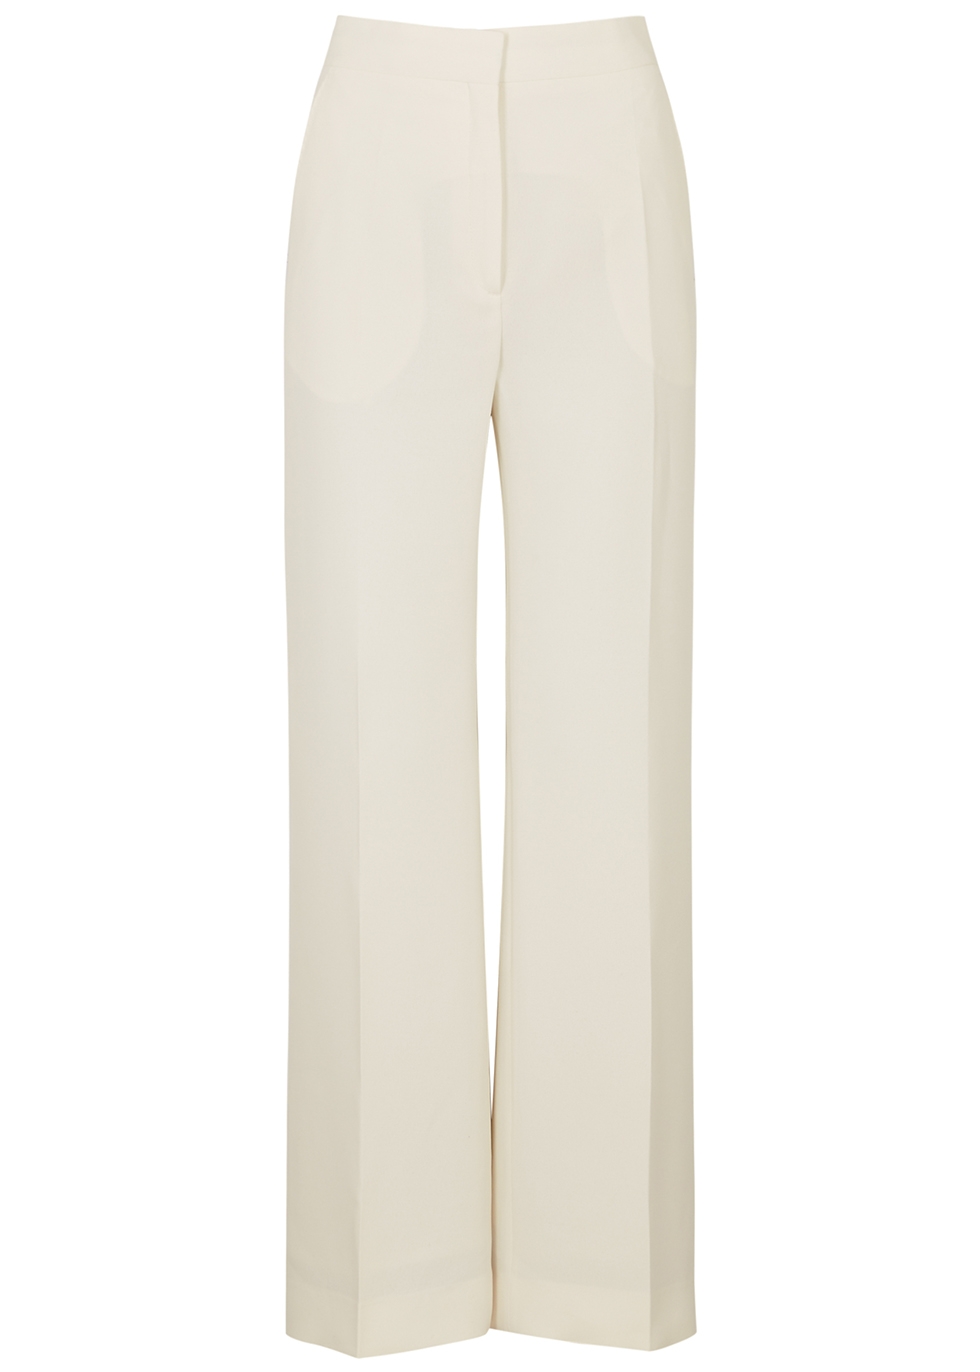 Mark Kenly Domino Tan Petra ivory wide-leg trousers